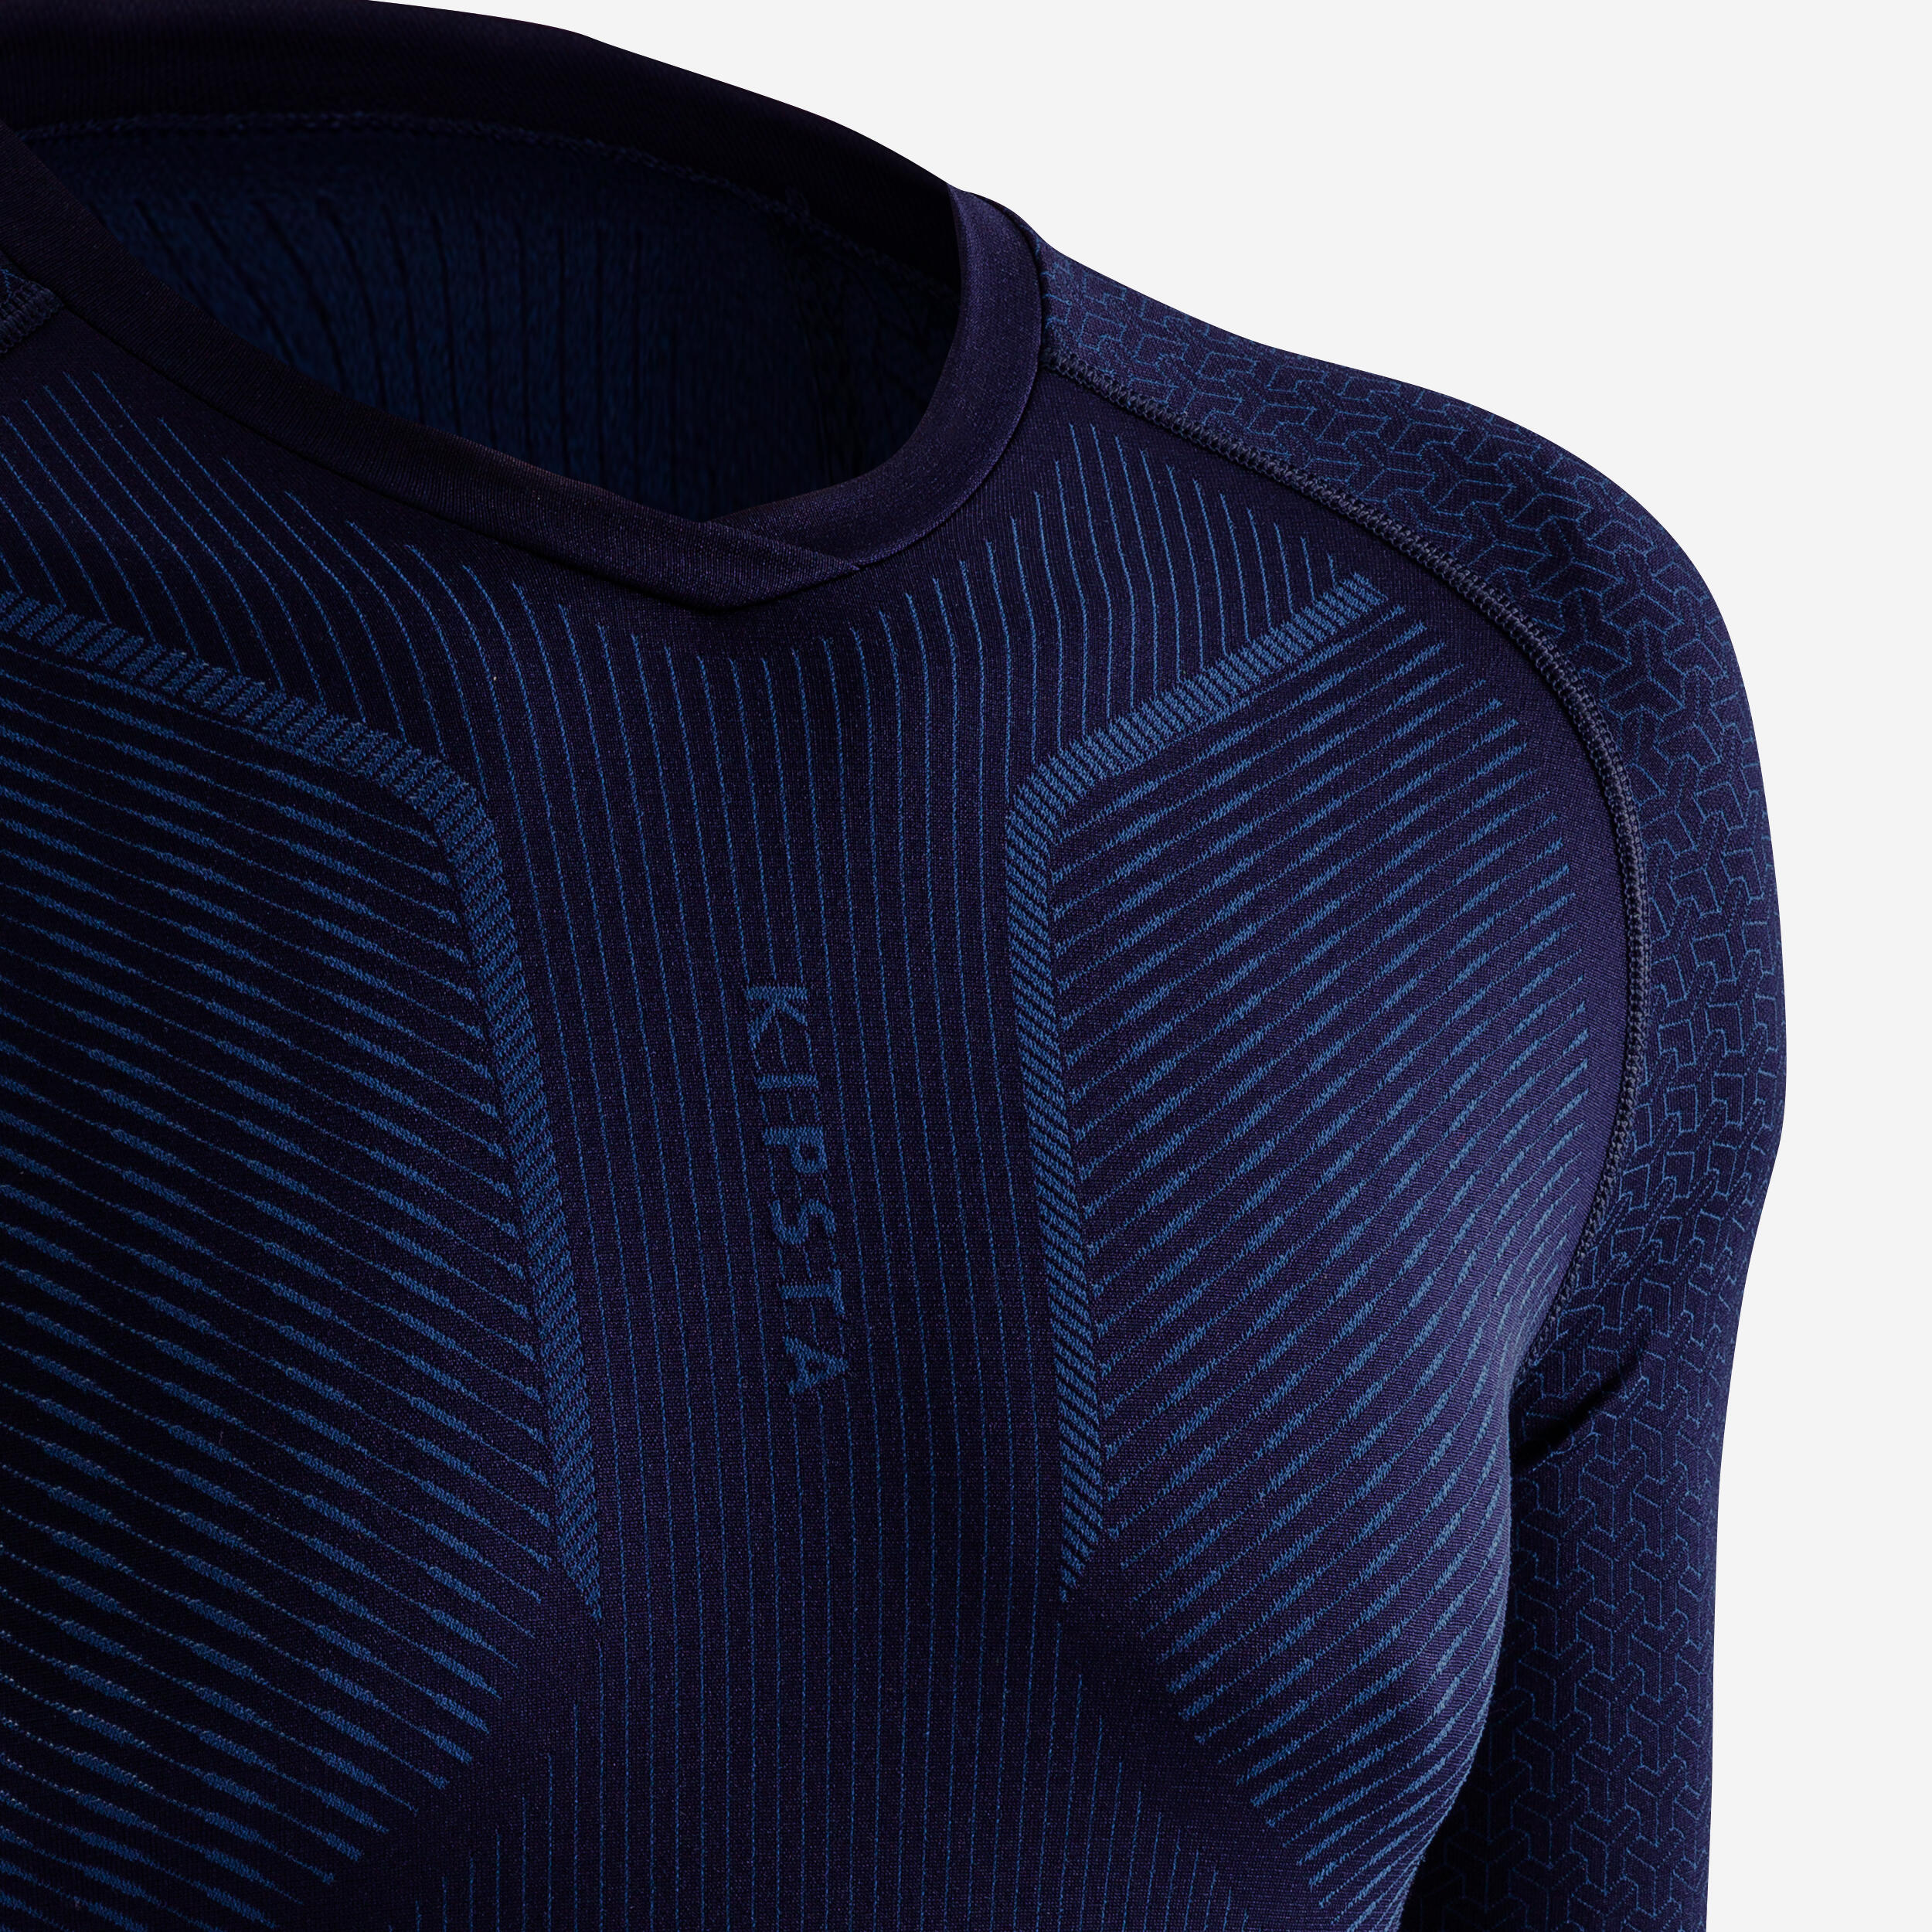 Adult Long-Sleeved Thermal Base Layer Top Keepdry 500 - Navy Blue 11/14